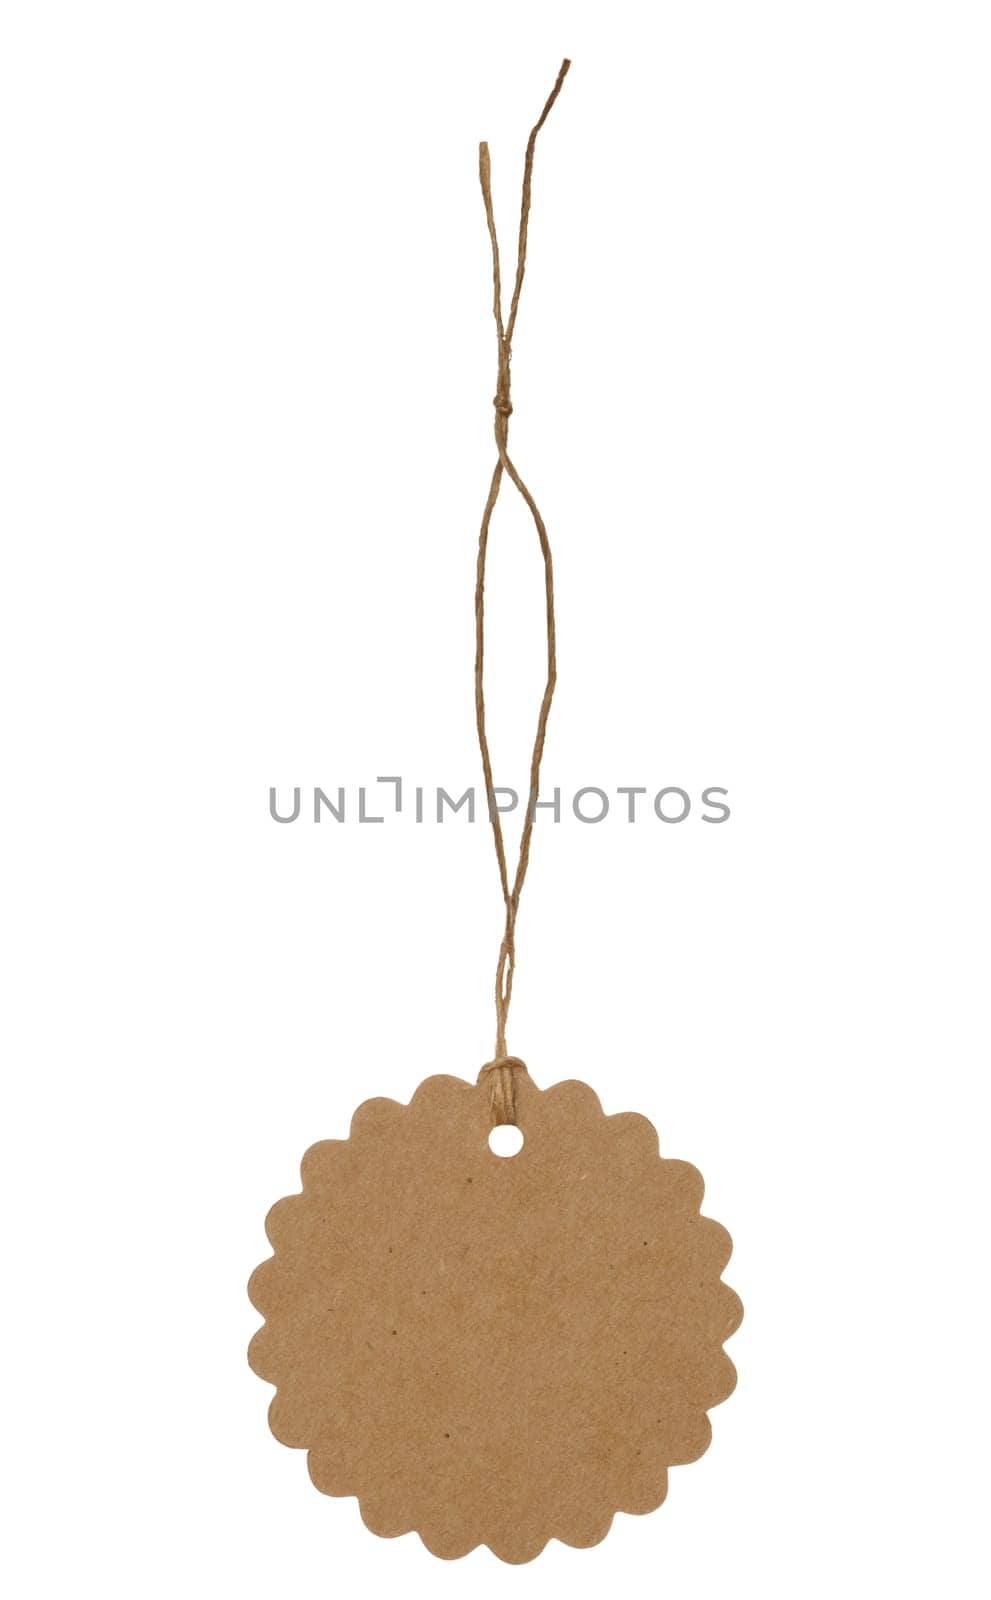 Round tag made of brown kraft paper with rope on isolated background